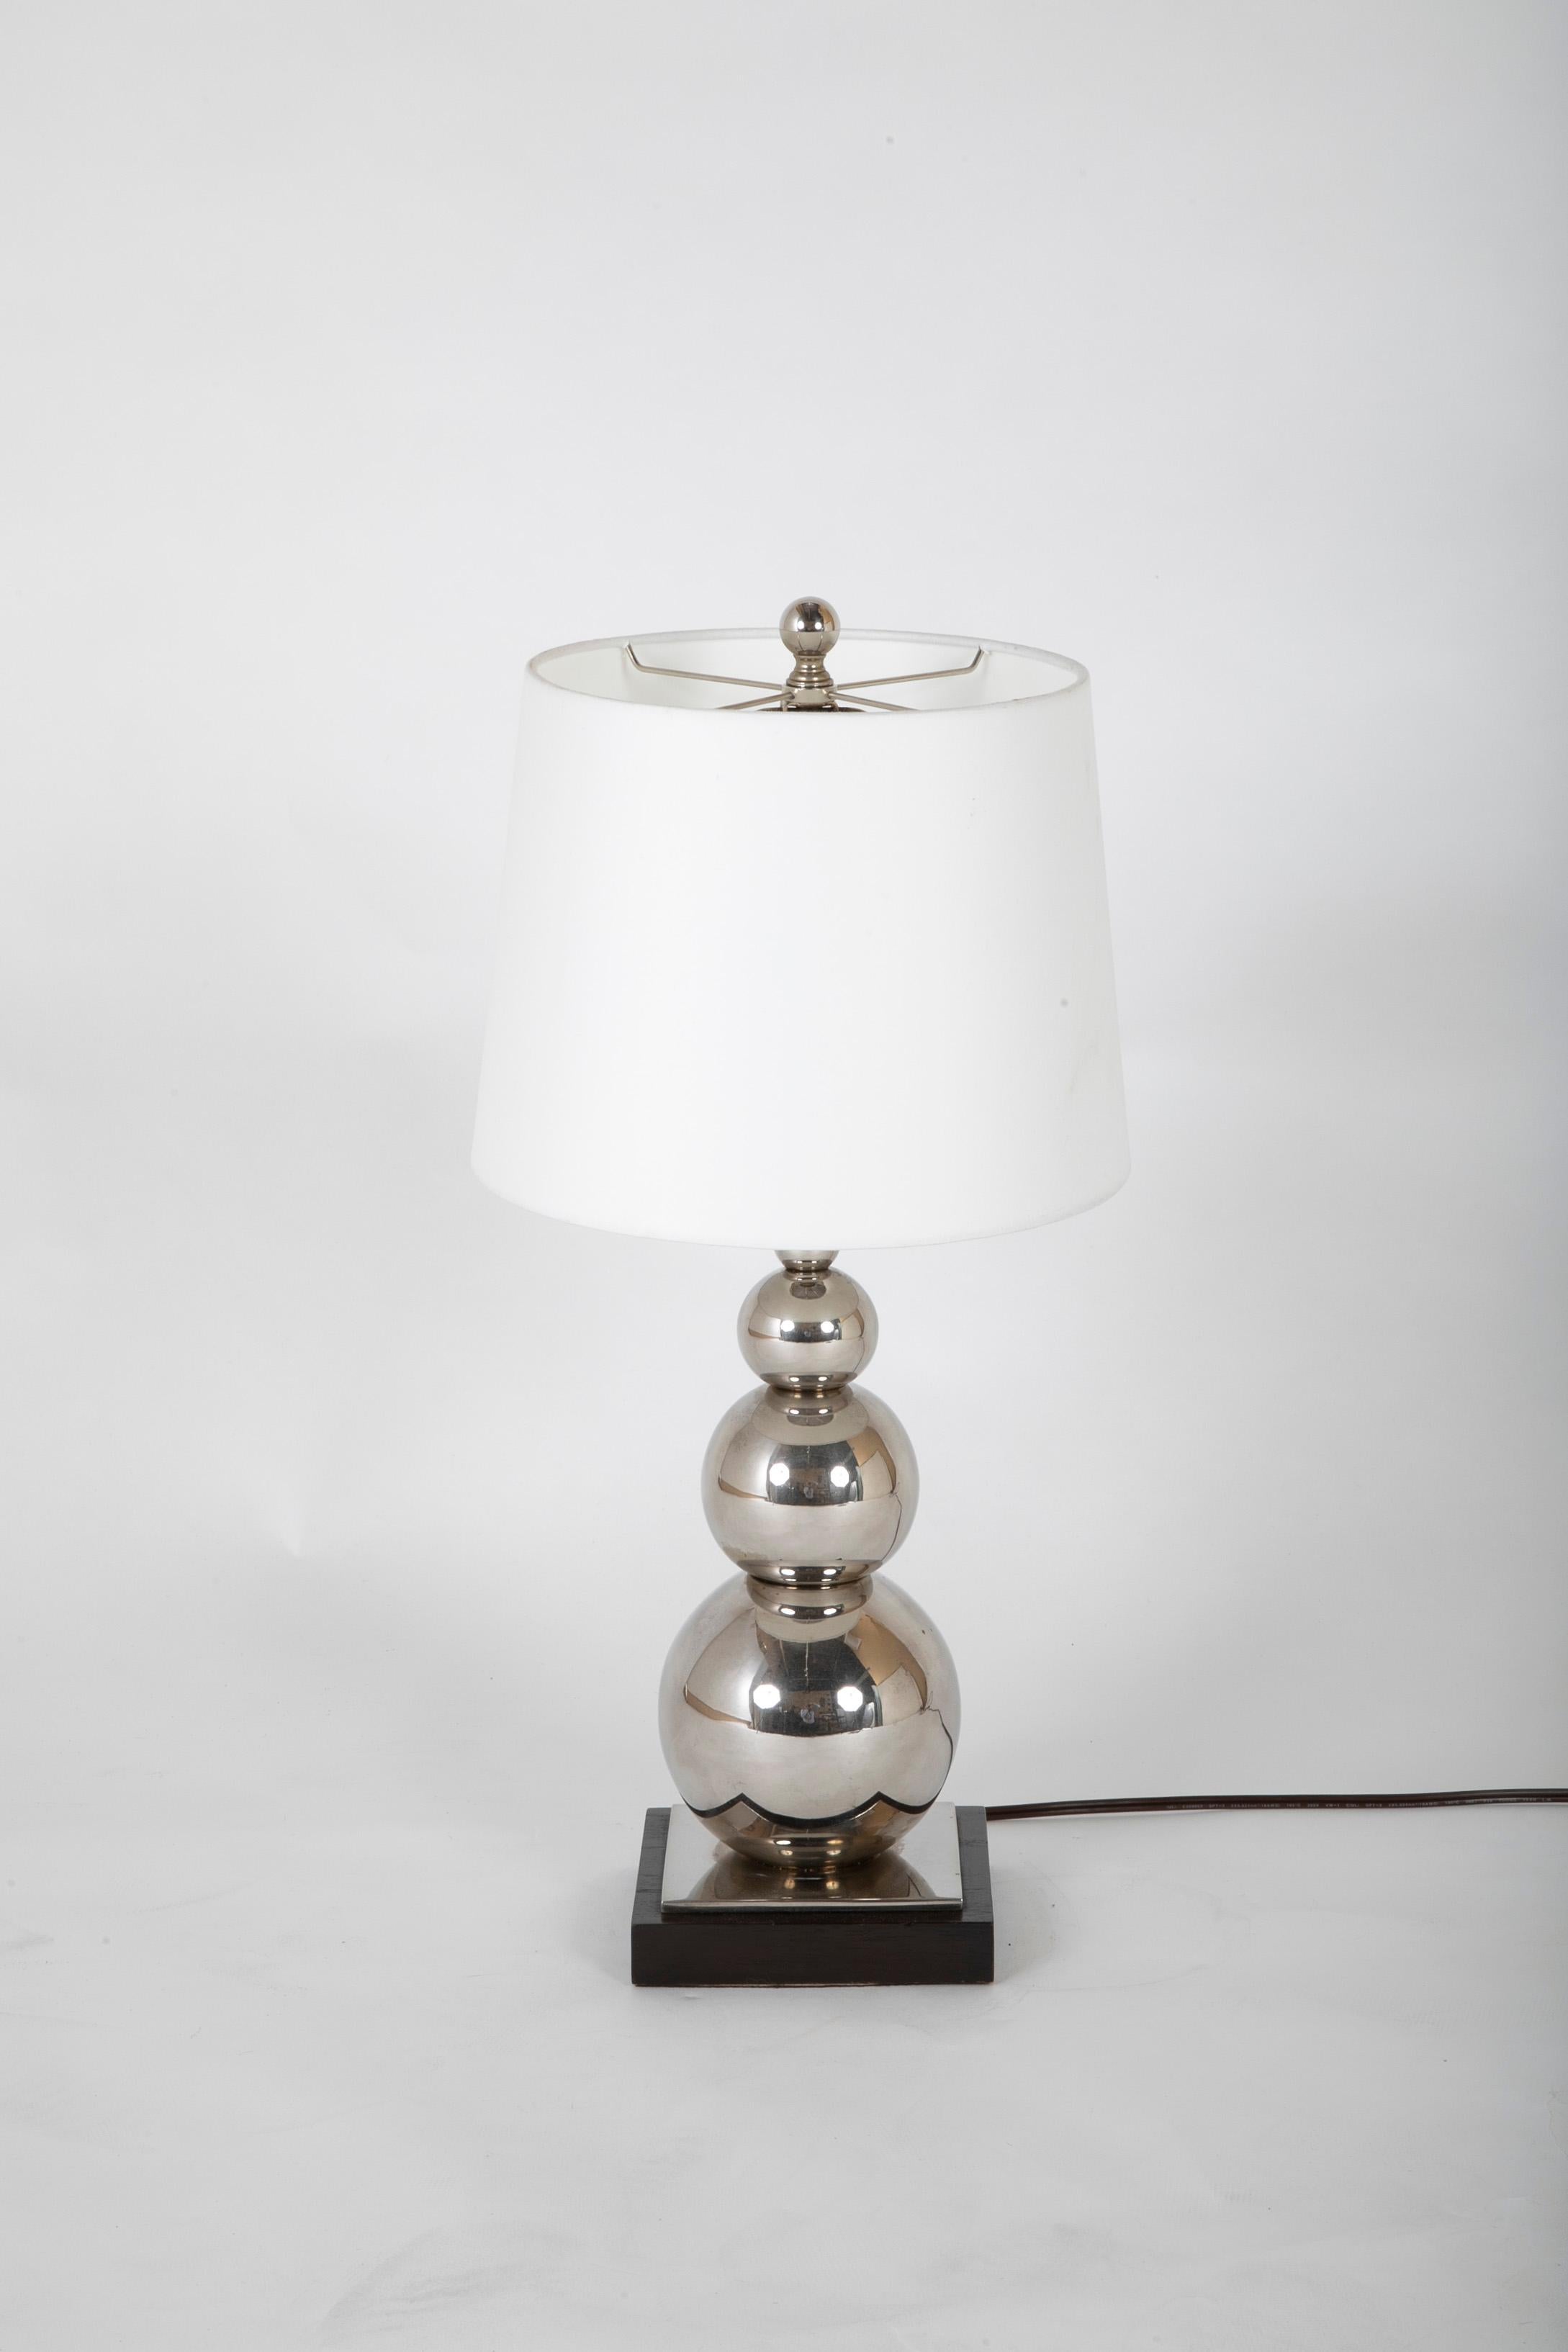 American Modern Polished Steel Stacked Ball Table Lamp By Visual Comfort